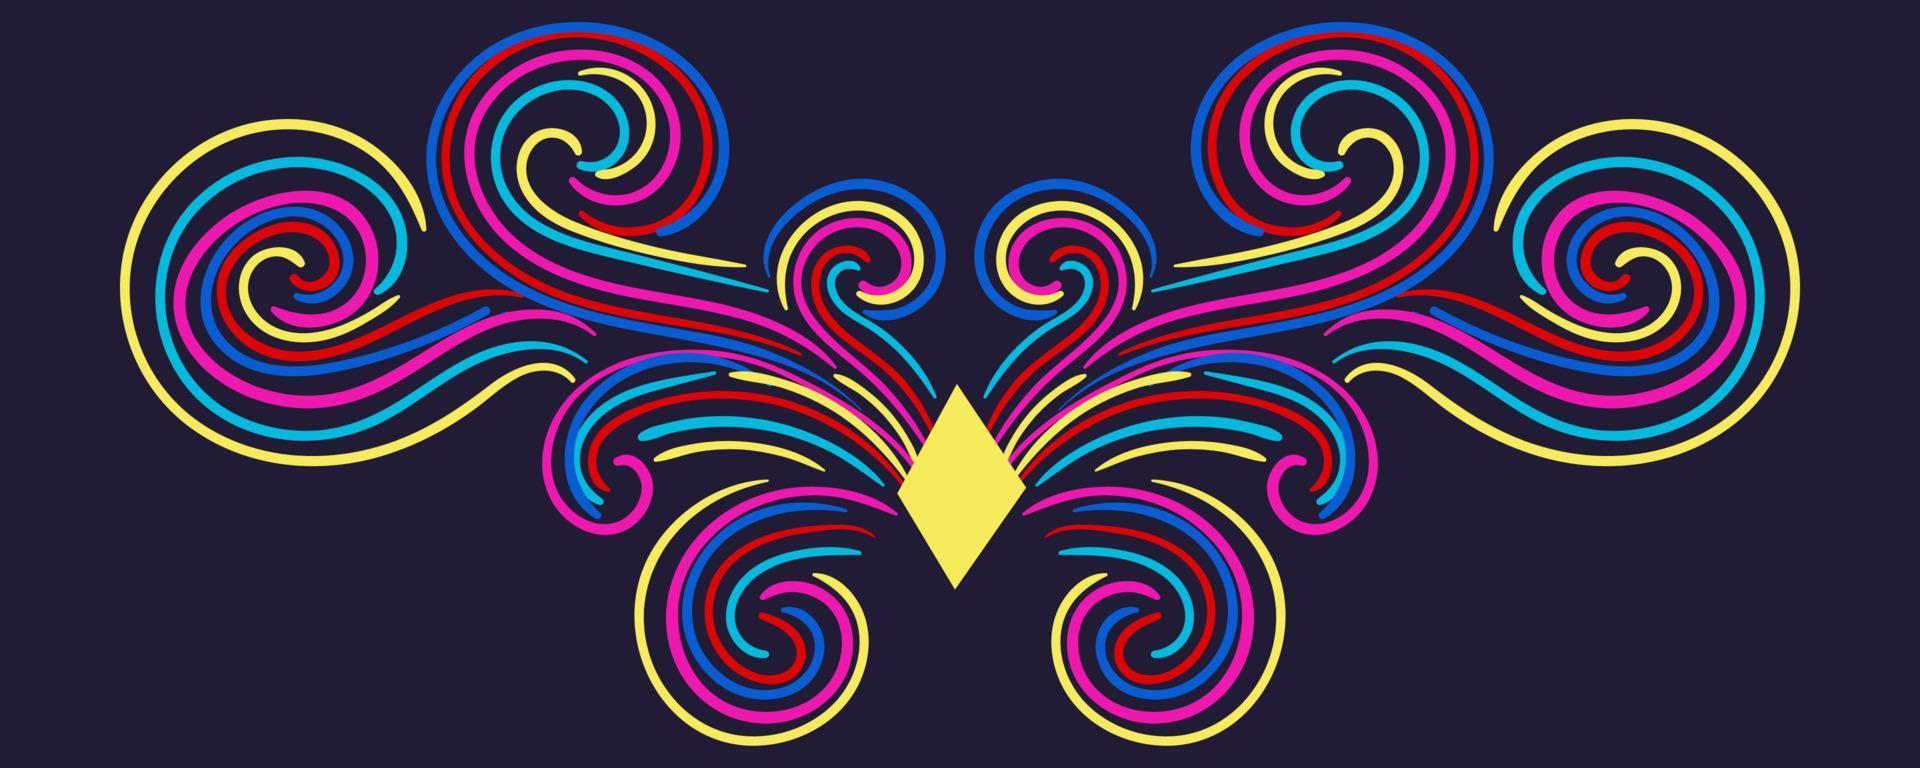 Colorful abstract curly element for design, swirl, curl. Divider, frame isolated on dark background. vector